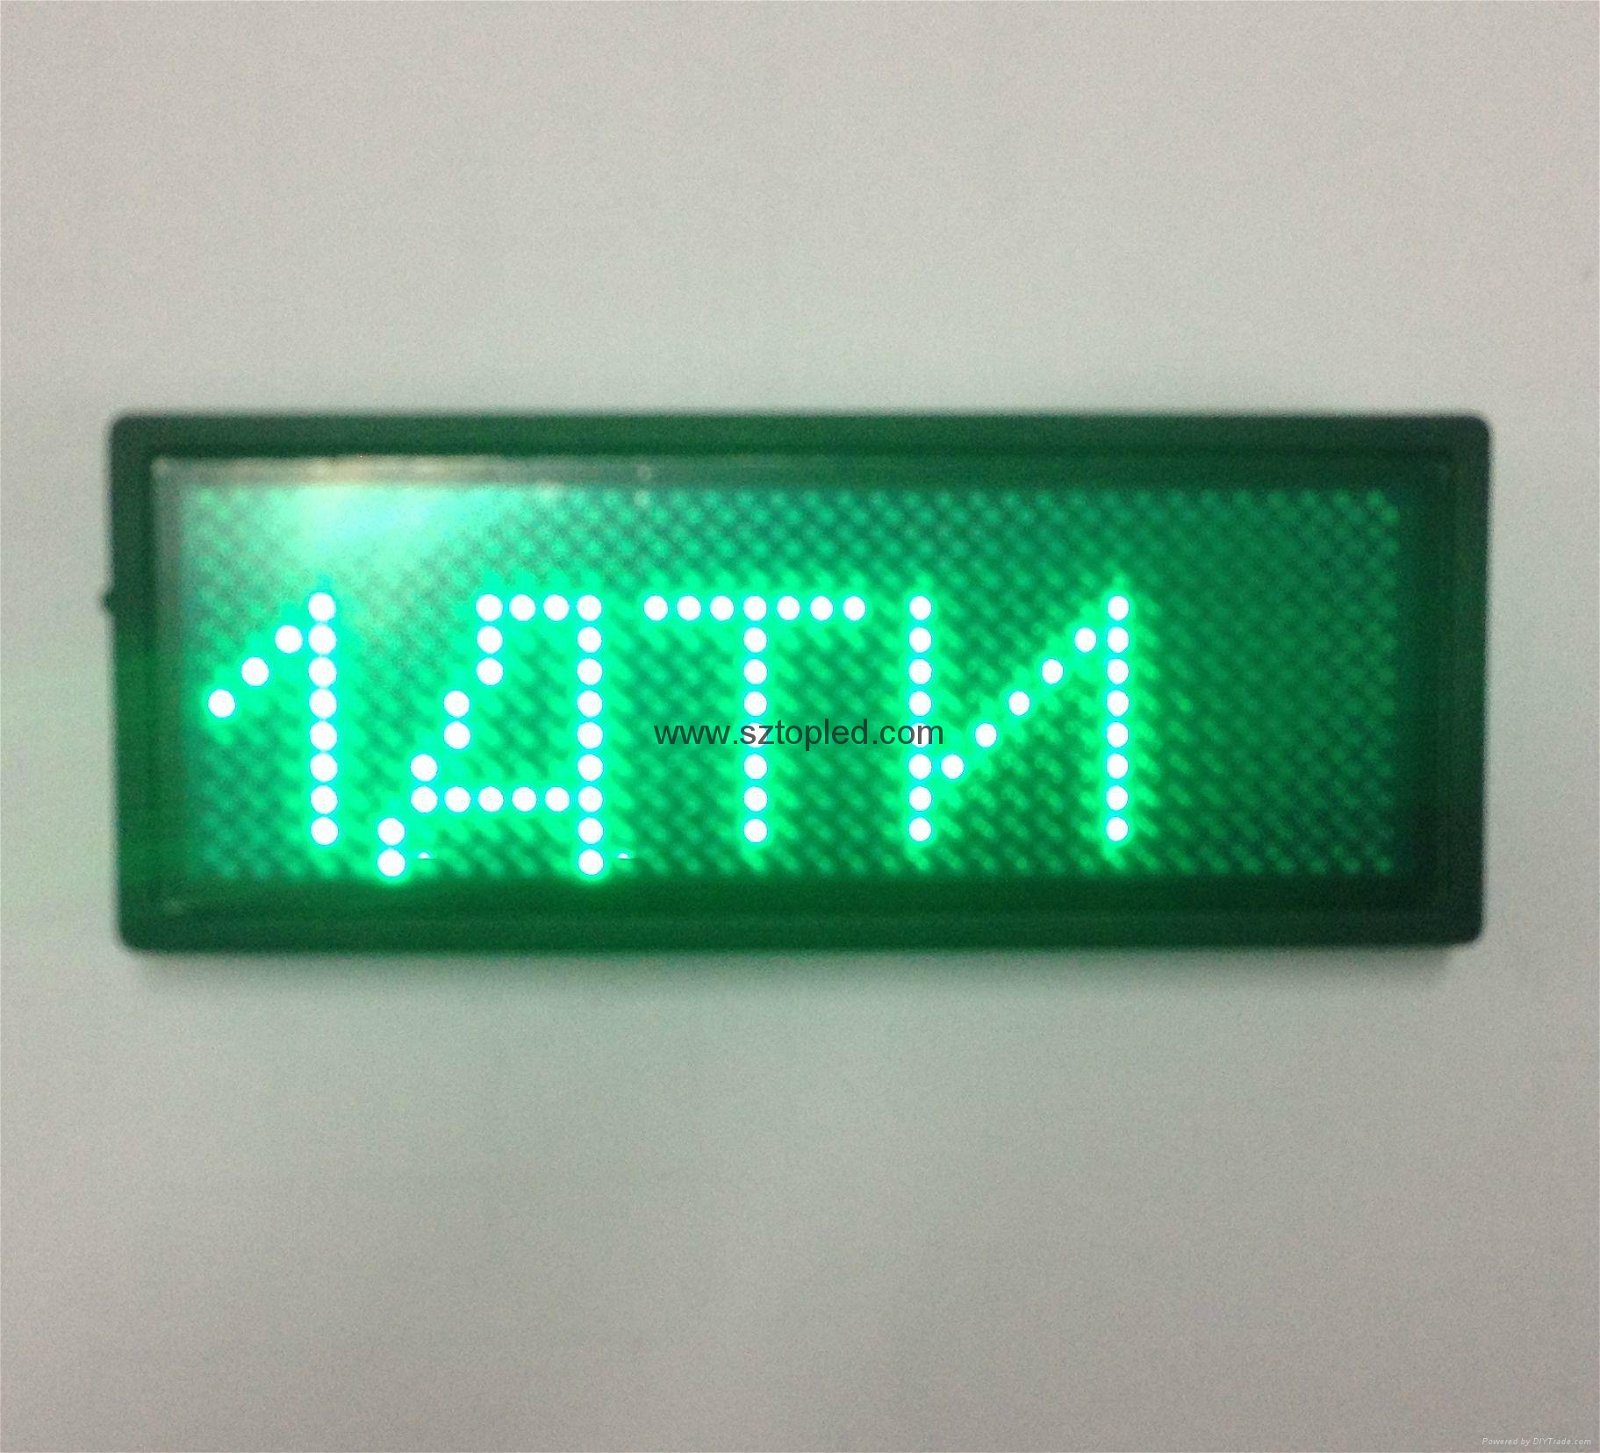  Russian support  LED name board /tag/card ,led scrolling message display 2